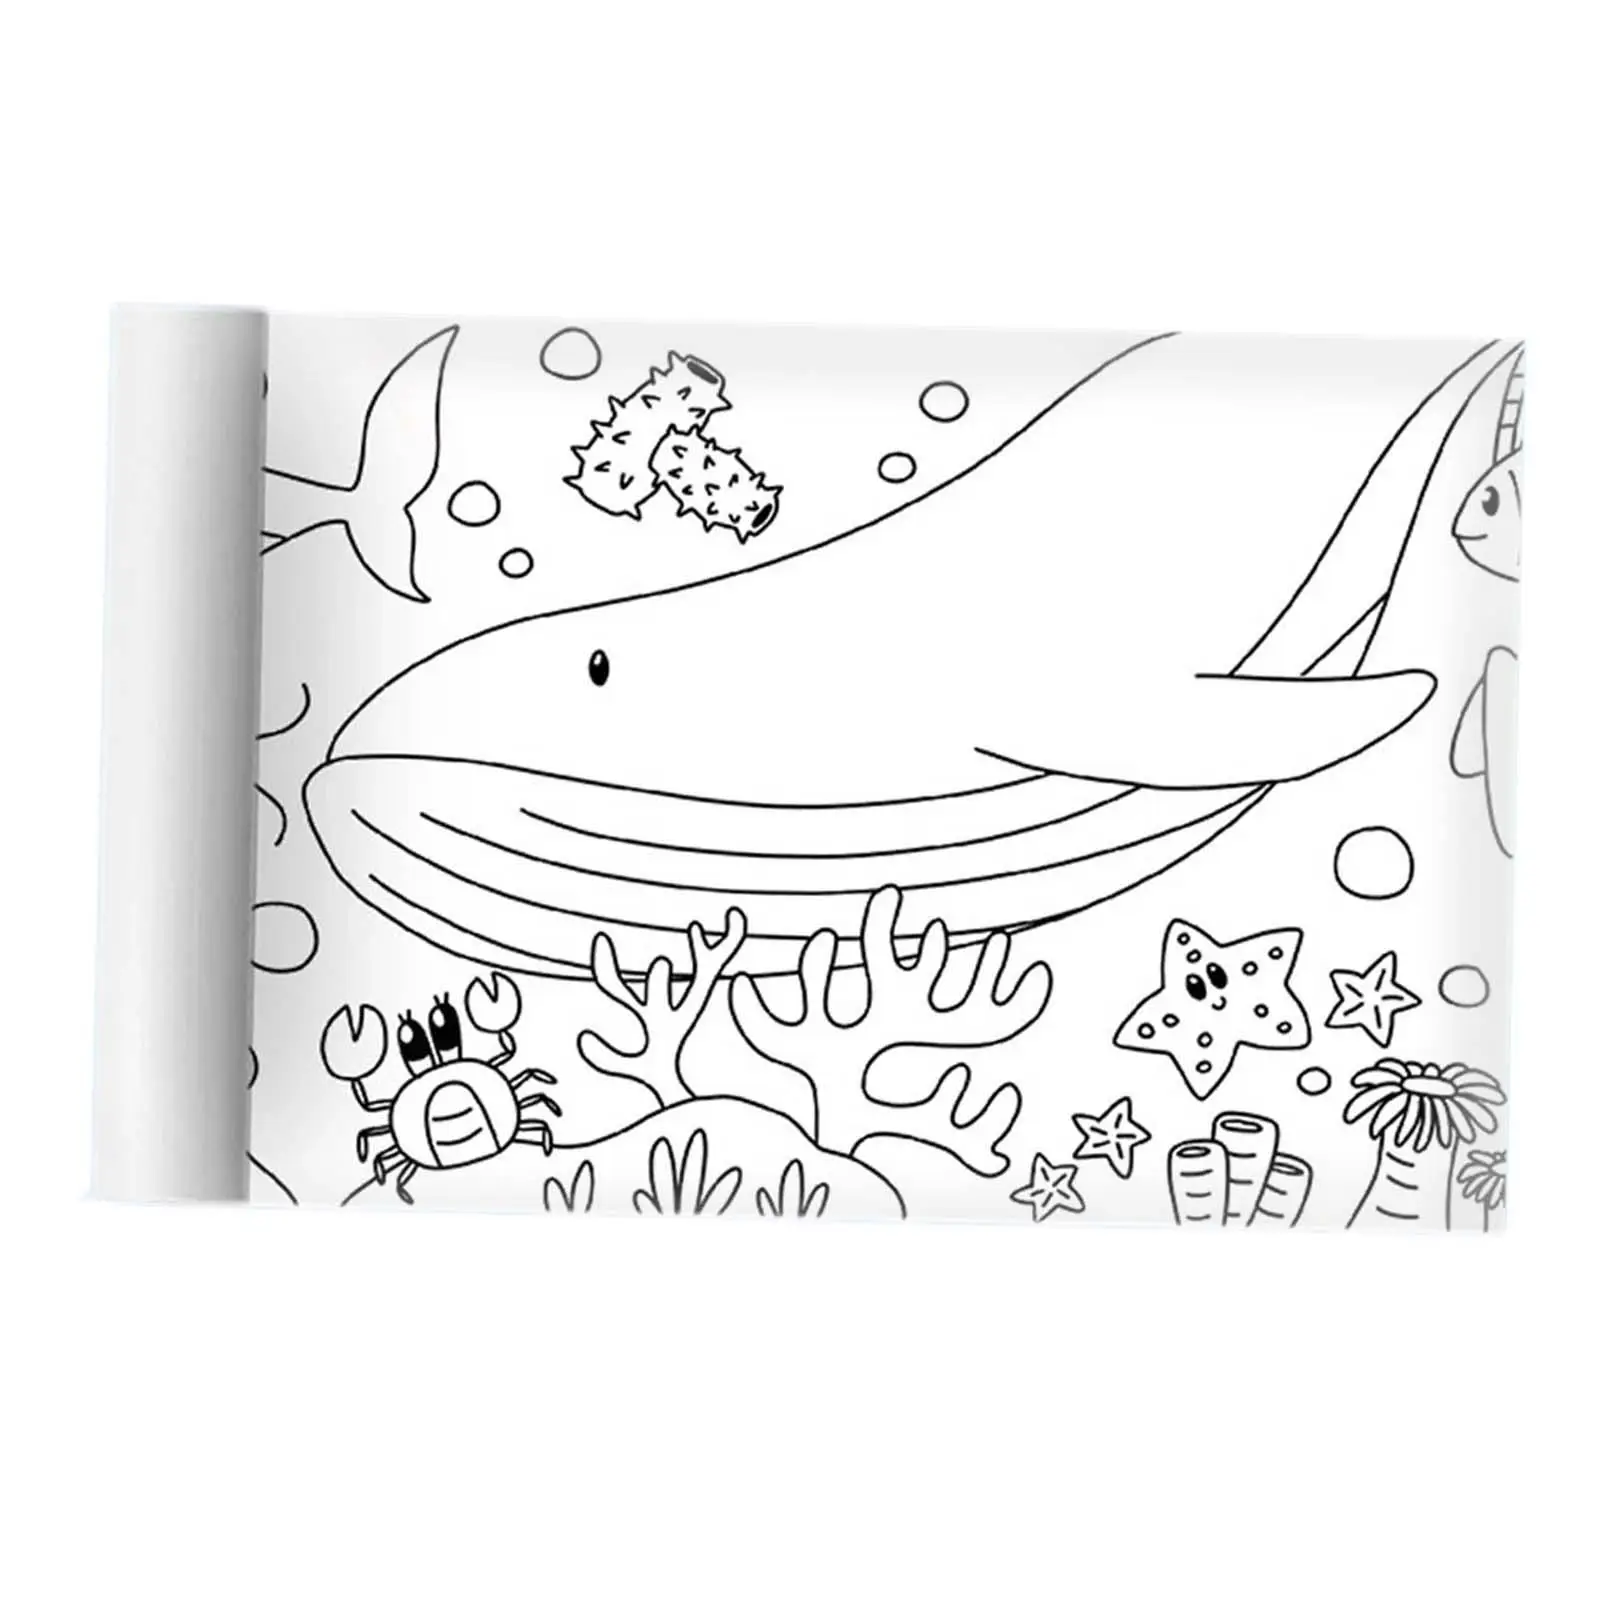 Coloring Paper Roll Coloring Books Coloring Tablecloth Wall Coloring Sheets